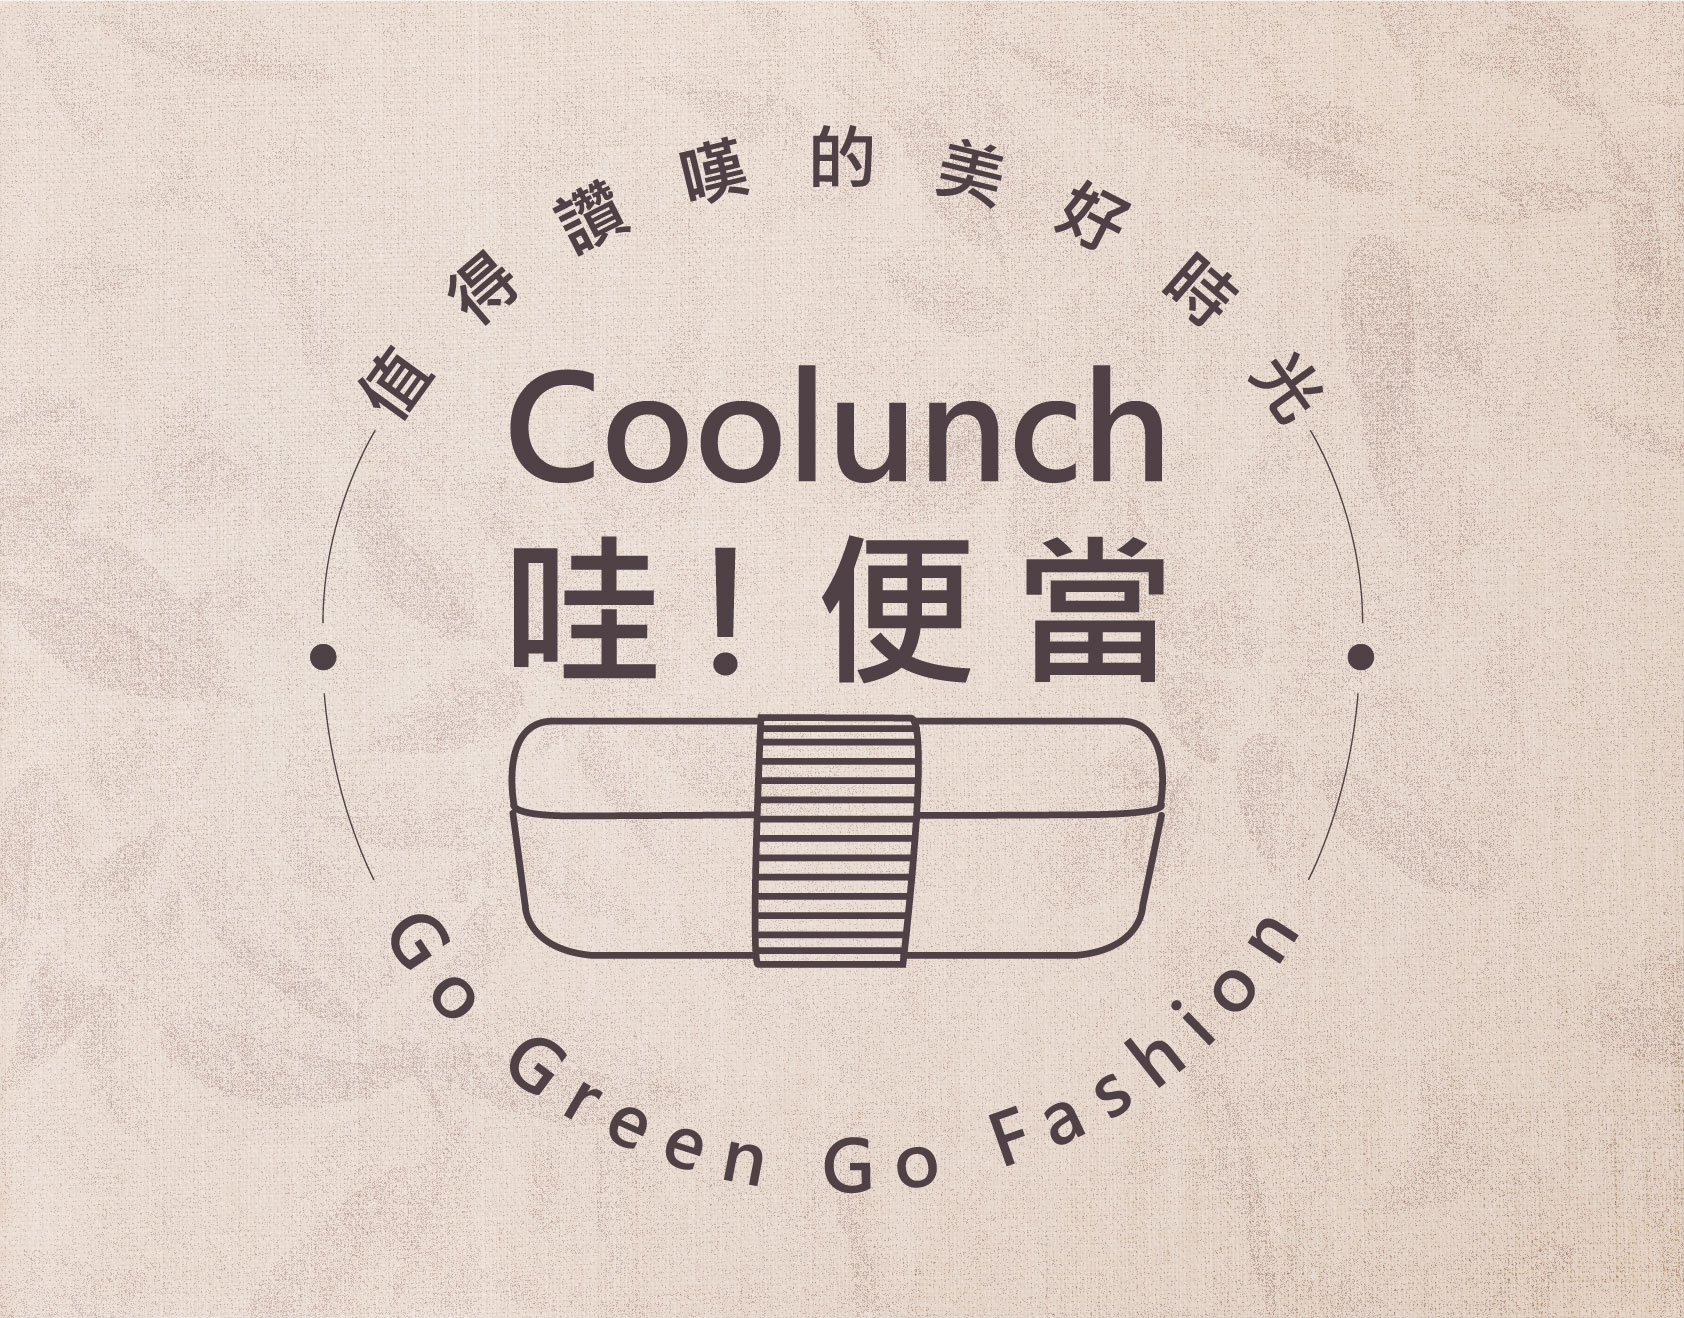 Coolunch Brand Identity Project